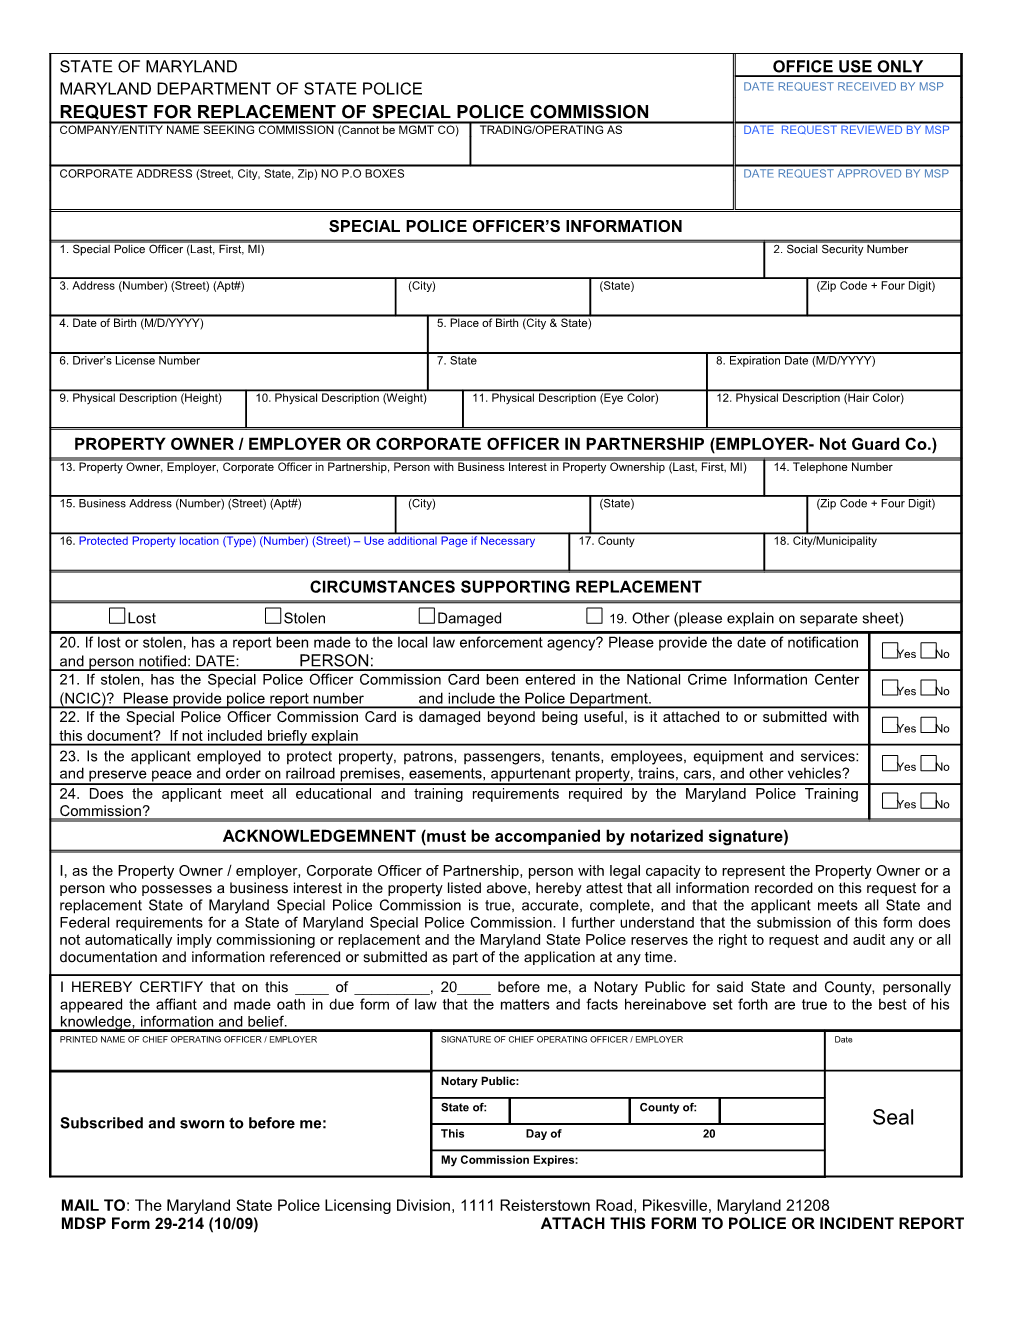 MDSP Form29-214 (10/09)ATTACH THIS FORM to POLICE OR INCIDENT REPORT